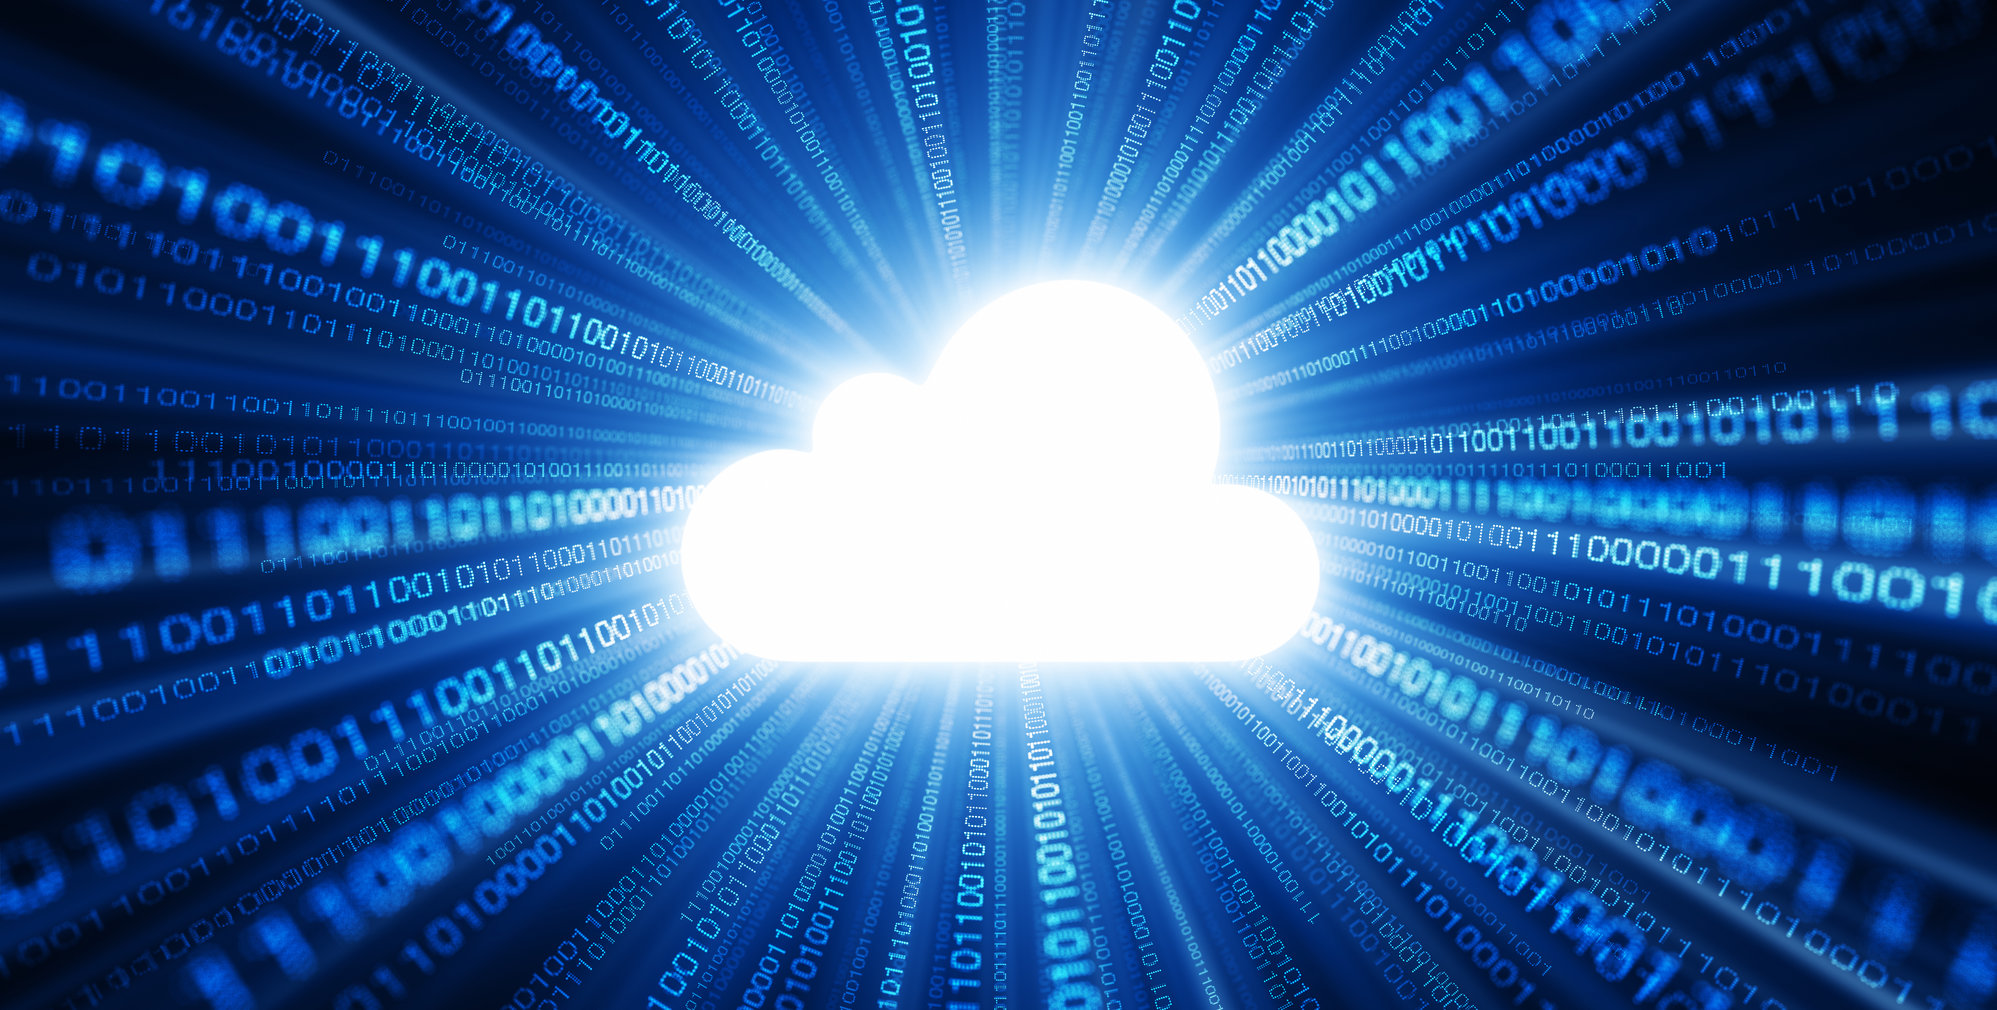 Securing the Cloud - a challenge as well as an opportunity